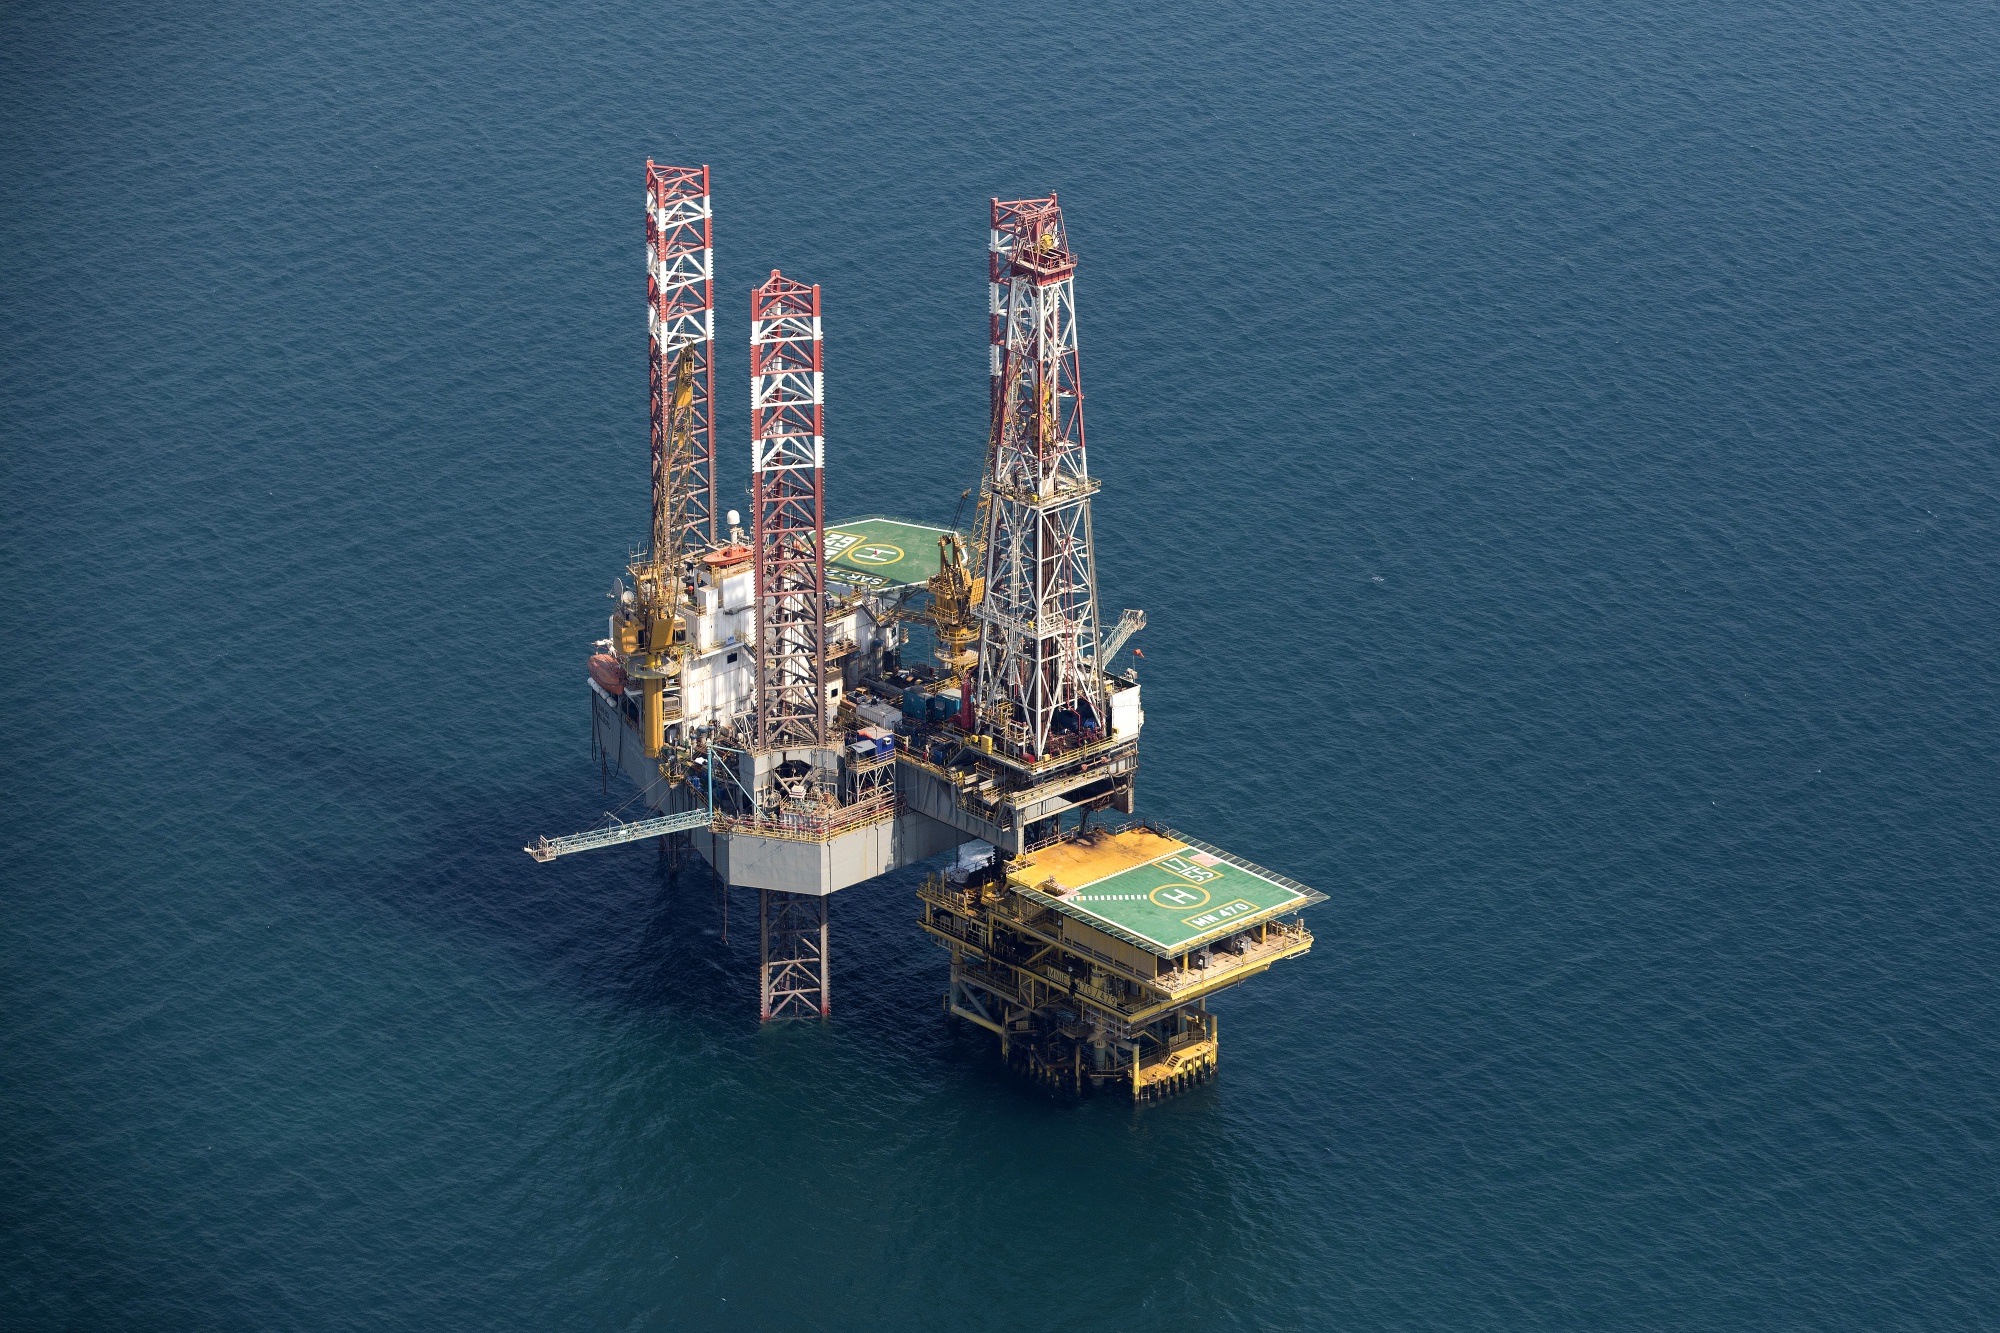 An offshore drilling platform stands in shallow waters at the Manifa offshore oilfield, operated by Saudi Aramco, in Manifa, Saudi Arabia.